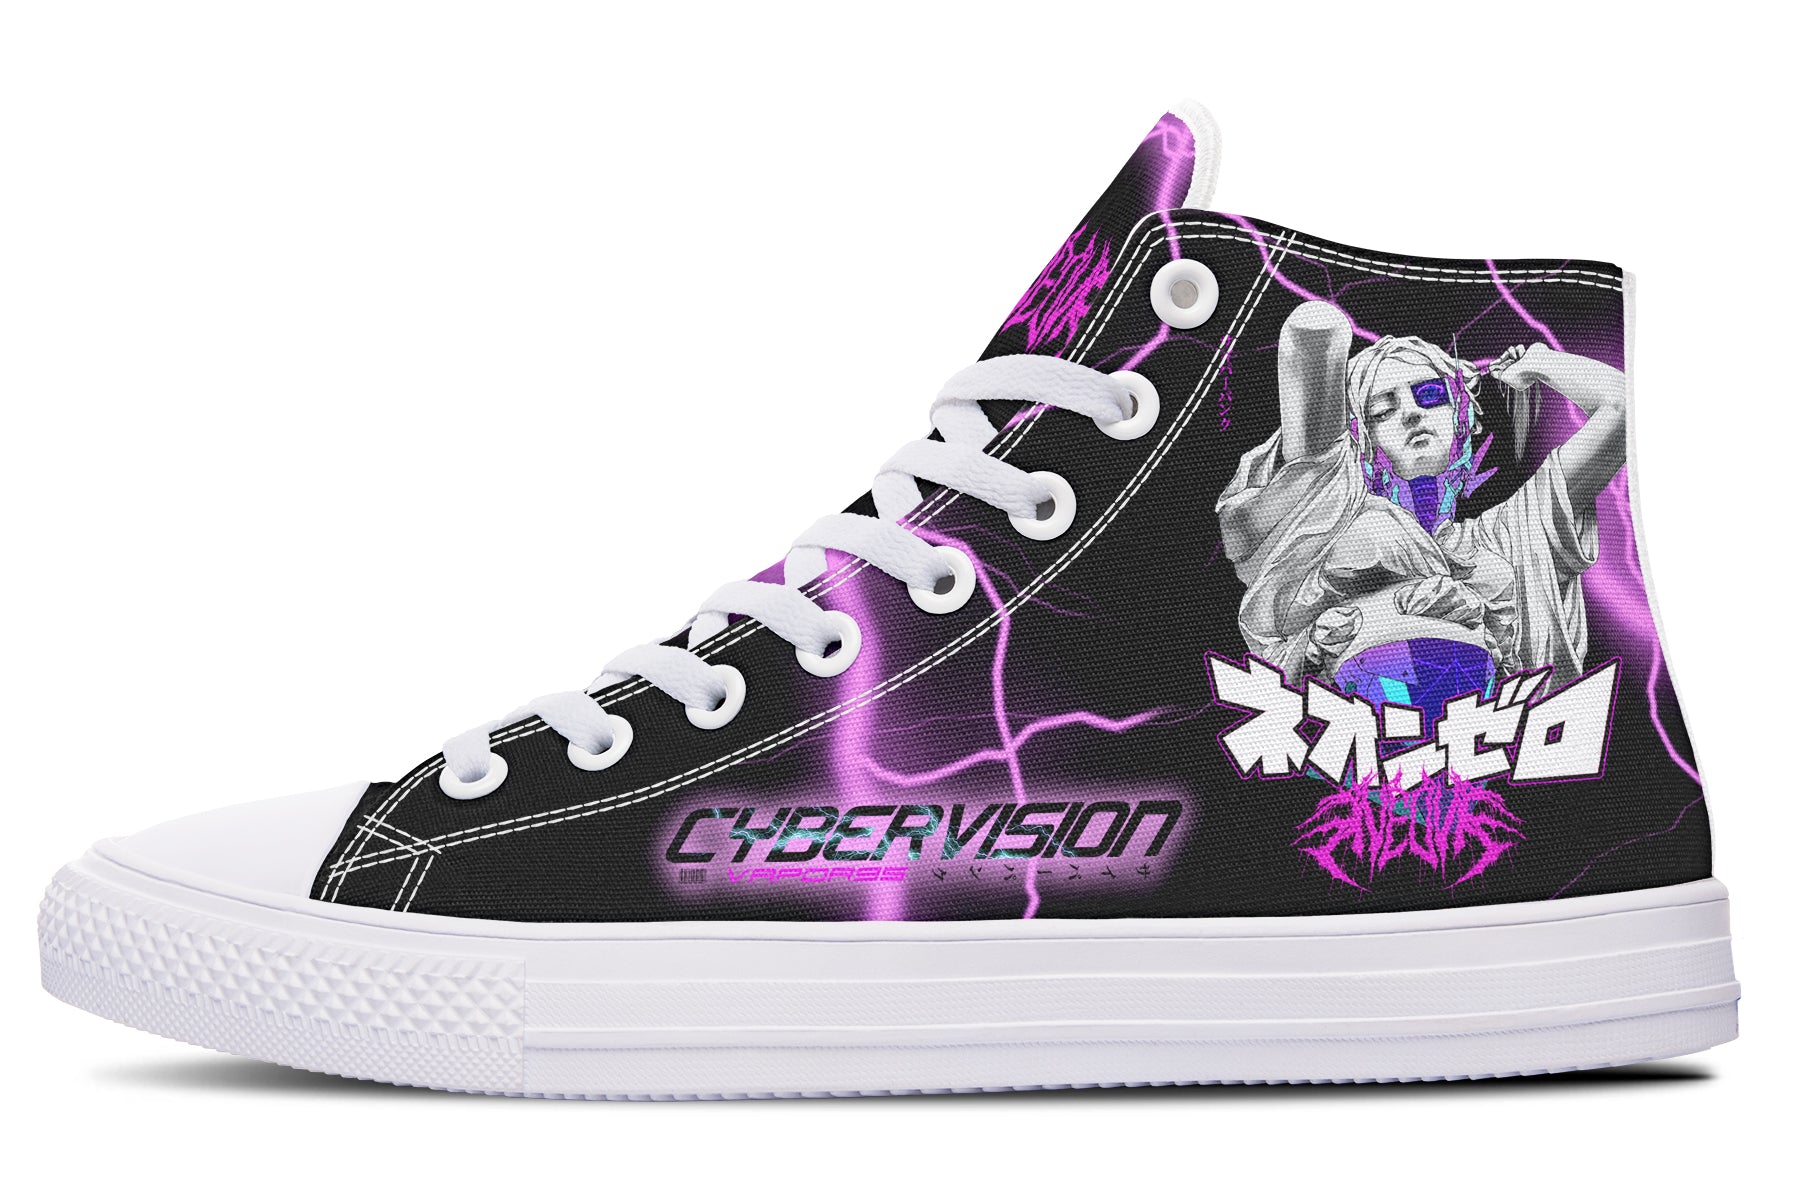 Cybervision High Tops